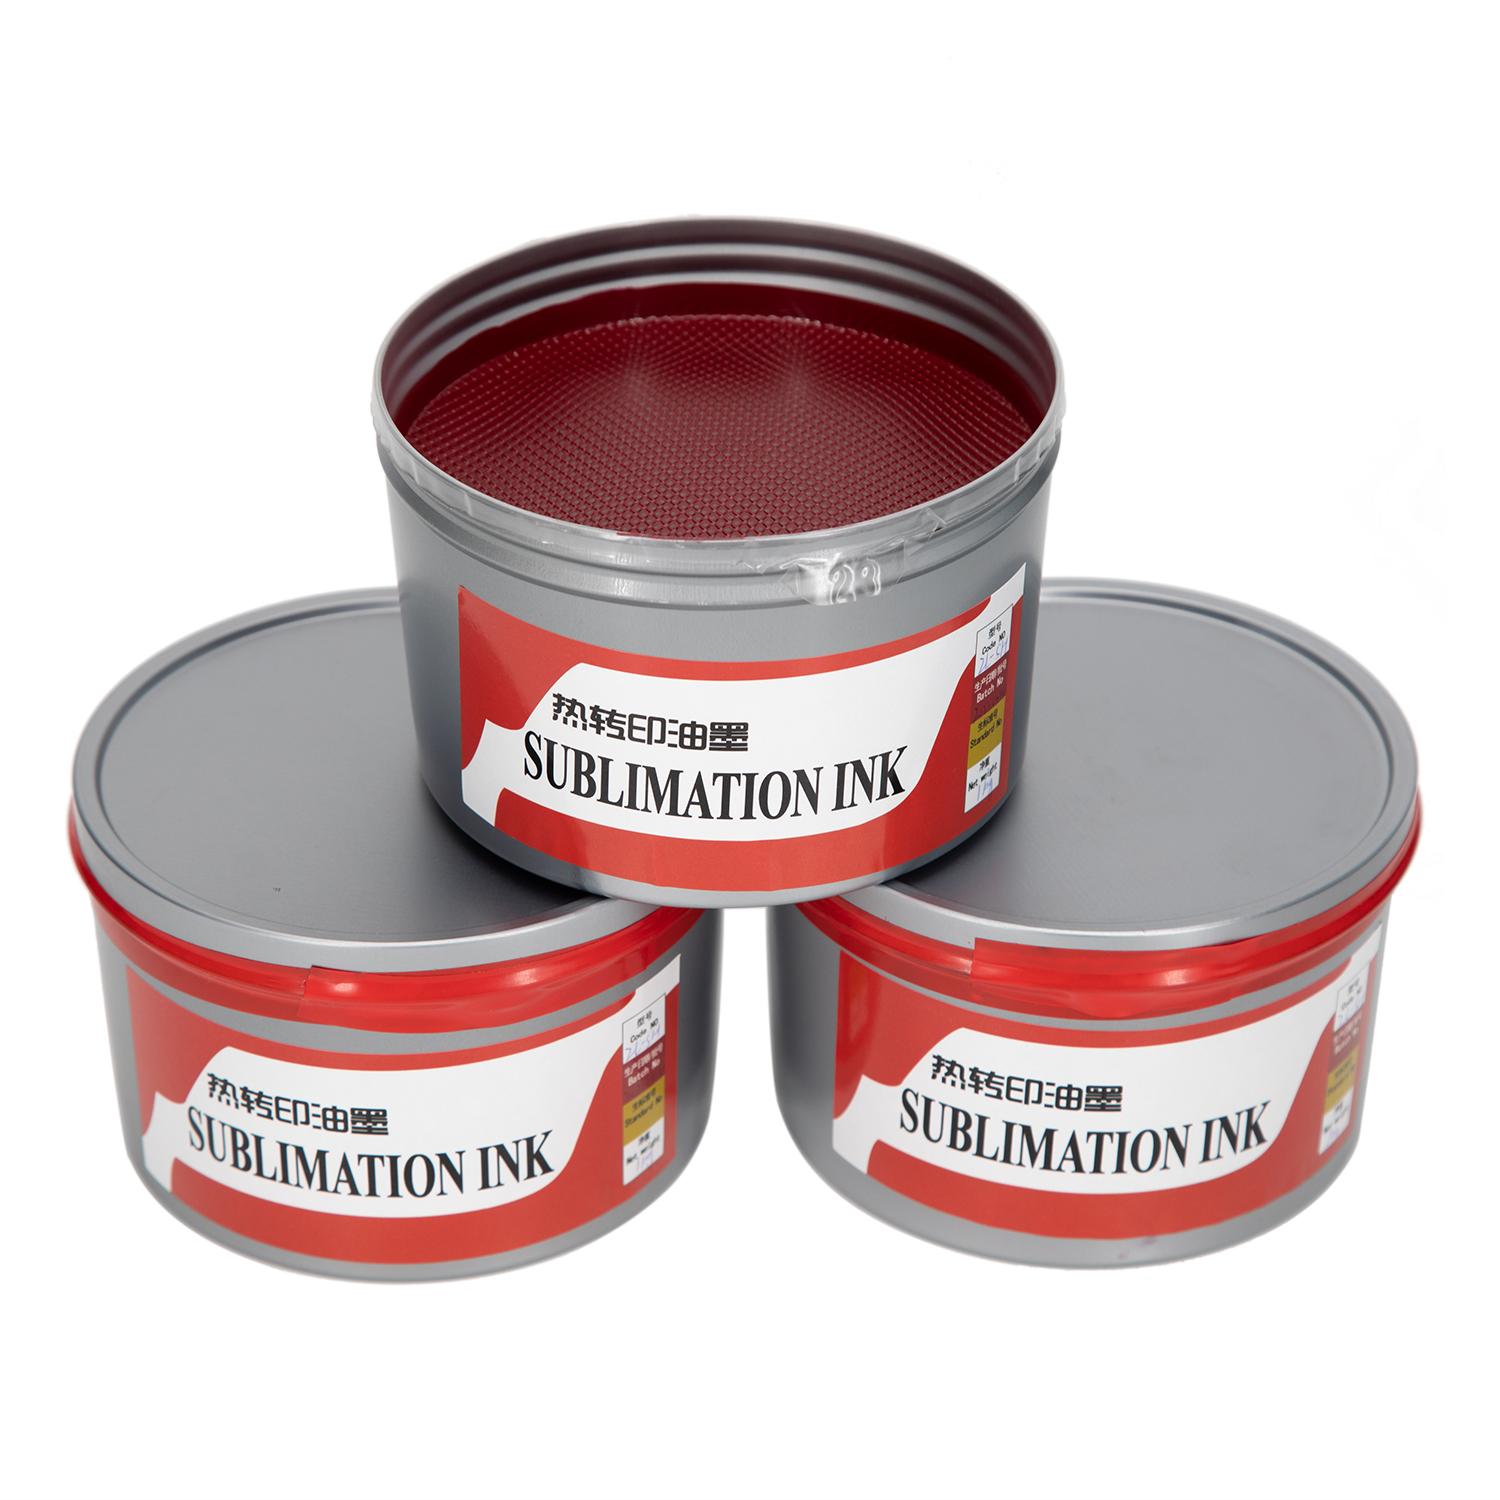 printing ink for sublimation and sublimation ink for offset printing